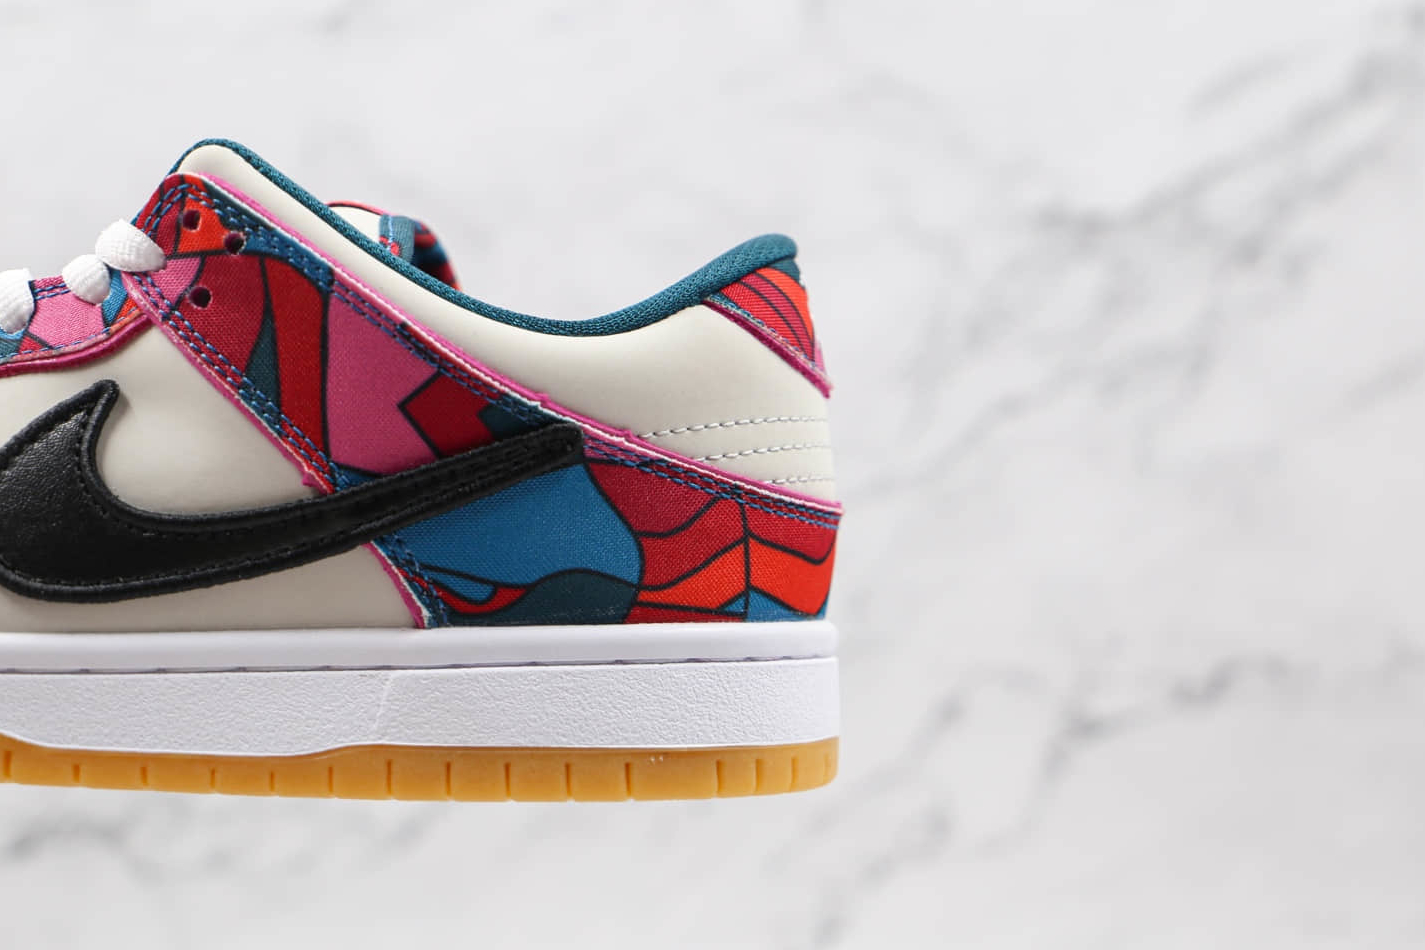 Nike Parra x Dunk Low Pro SB 'Abstract Art' DH7695-600 - Limited Edition Sneaker Release